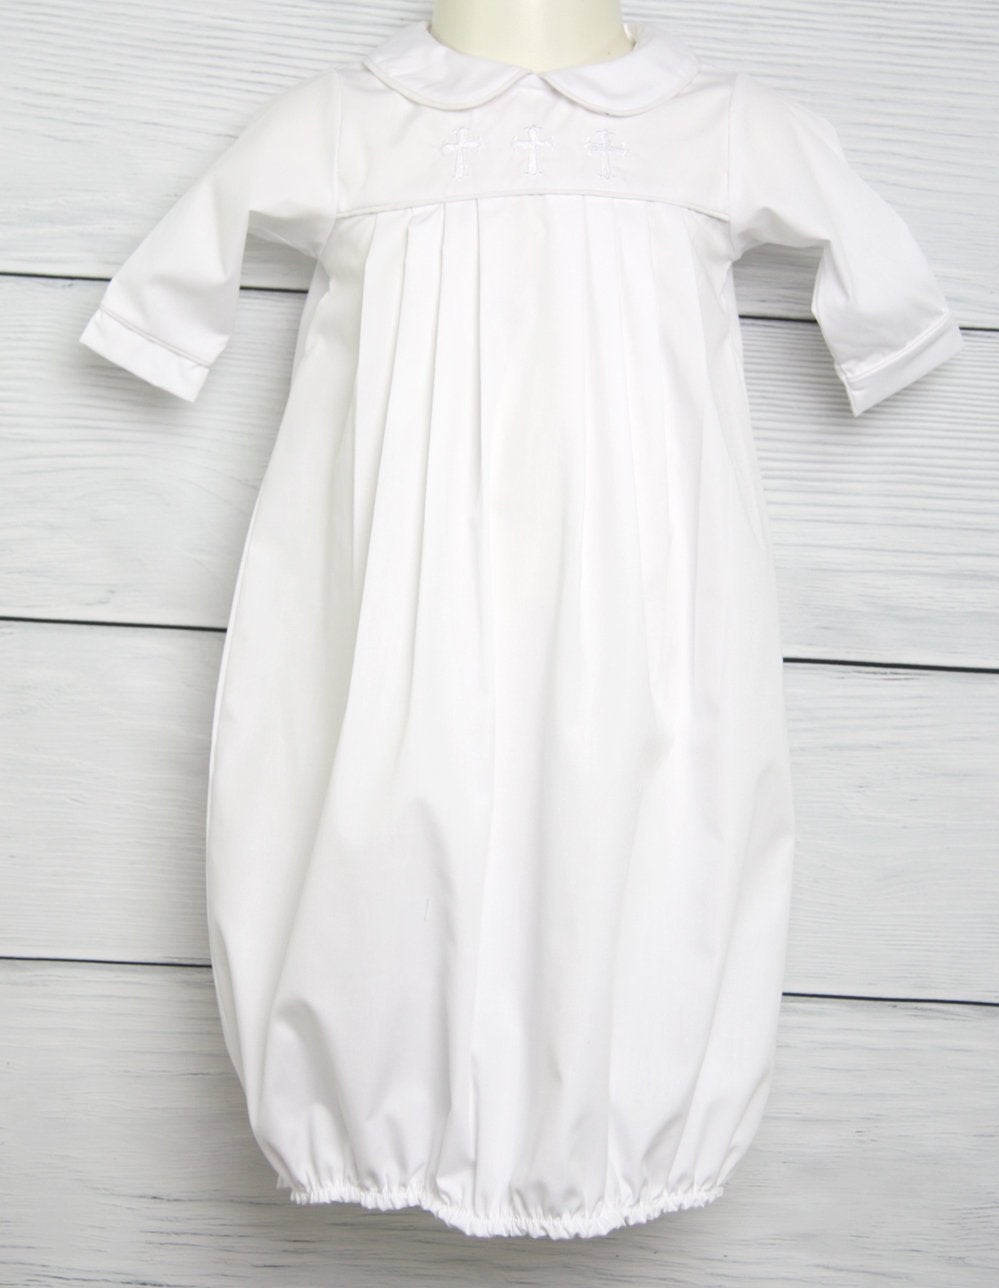 boy baptism outfits